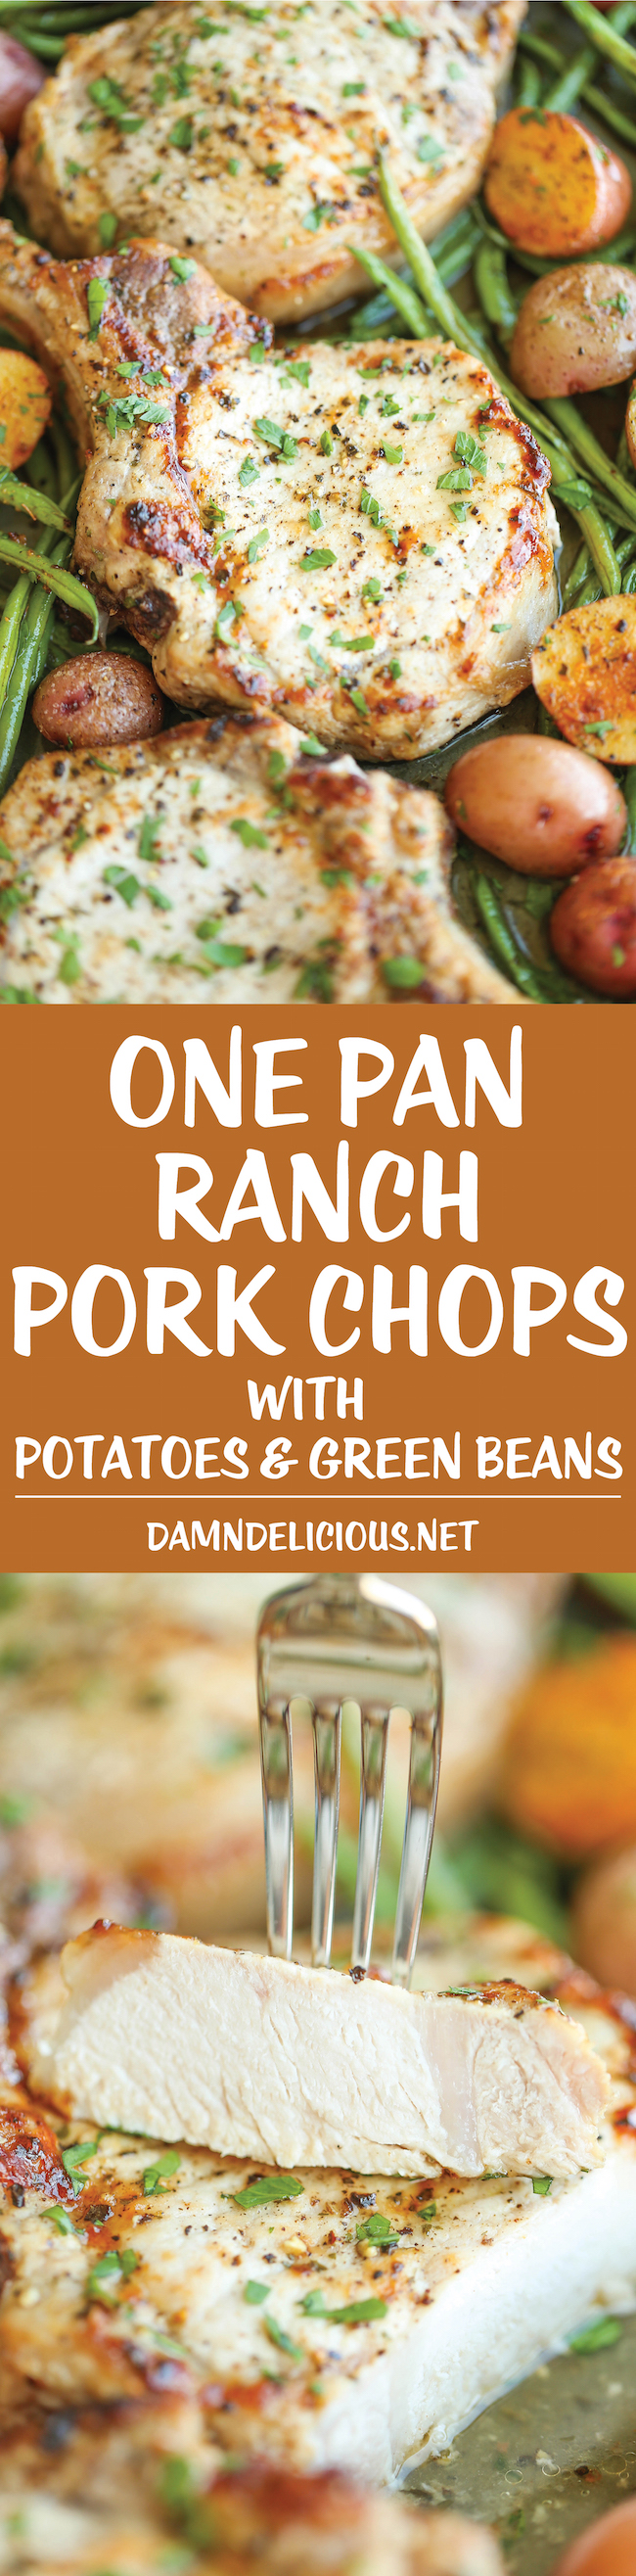 One Pan Ranch Pork Chops and Veggies - The easiest 5-ingredient meal EVER! And yes, you just need one pan with 5 min prep. It's quick, easy and effortless!